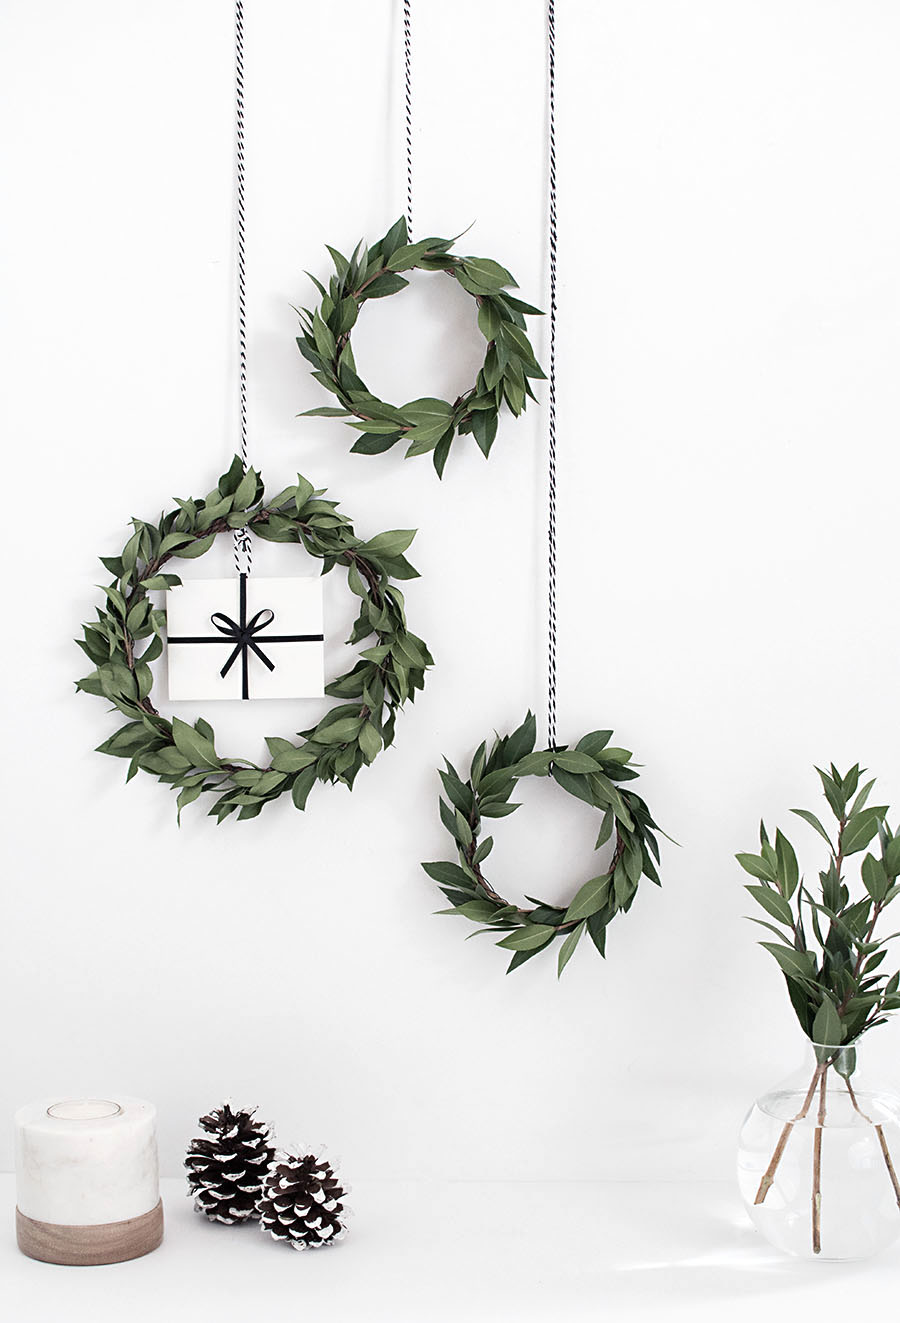 Bay leaves is a perfect material for mini homemade wreath that smells great.